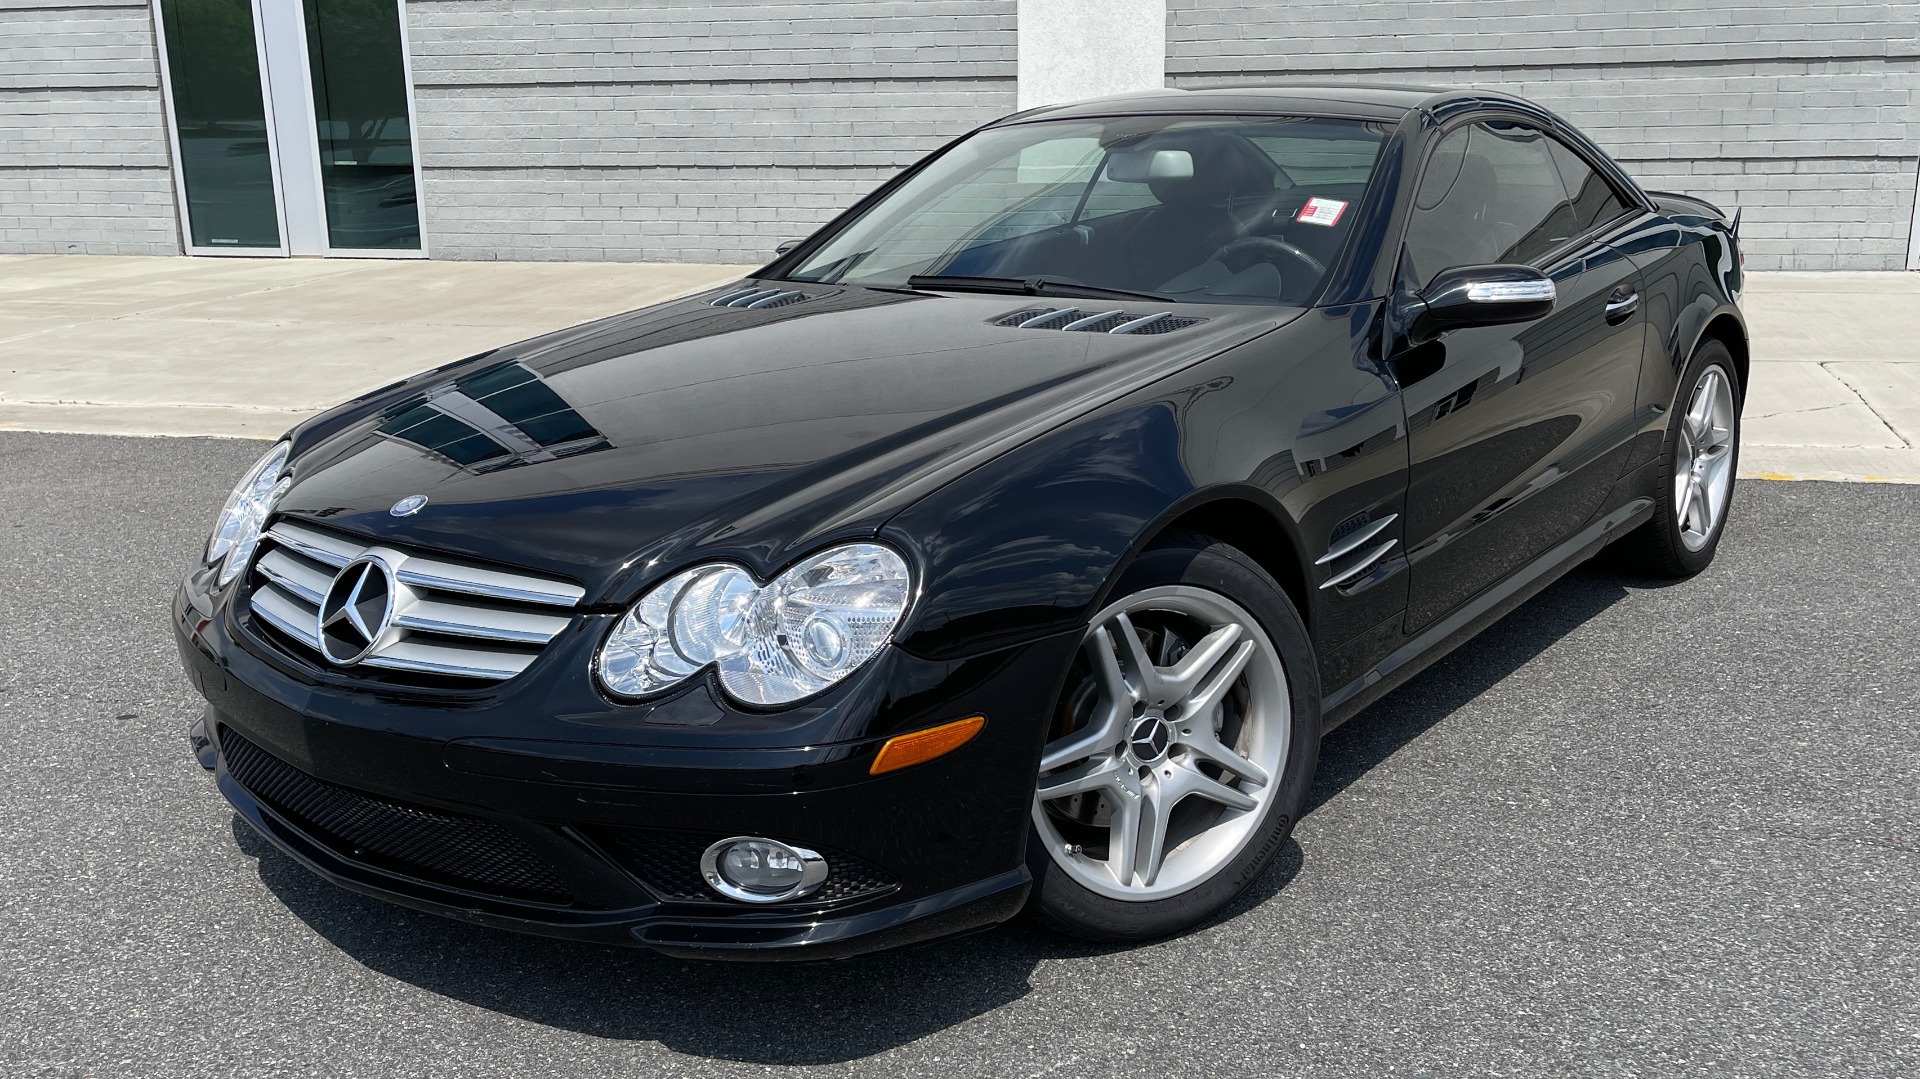 Used 2007 Mercedes-Benz SL-CLASS SL550 ROADSTER / 5.5L V8 / AMG SPORT PKG / BI-XENON HEADLAMPS for sale Sold at Formula Imports in Charlotte NC 28227 3